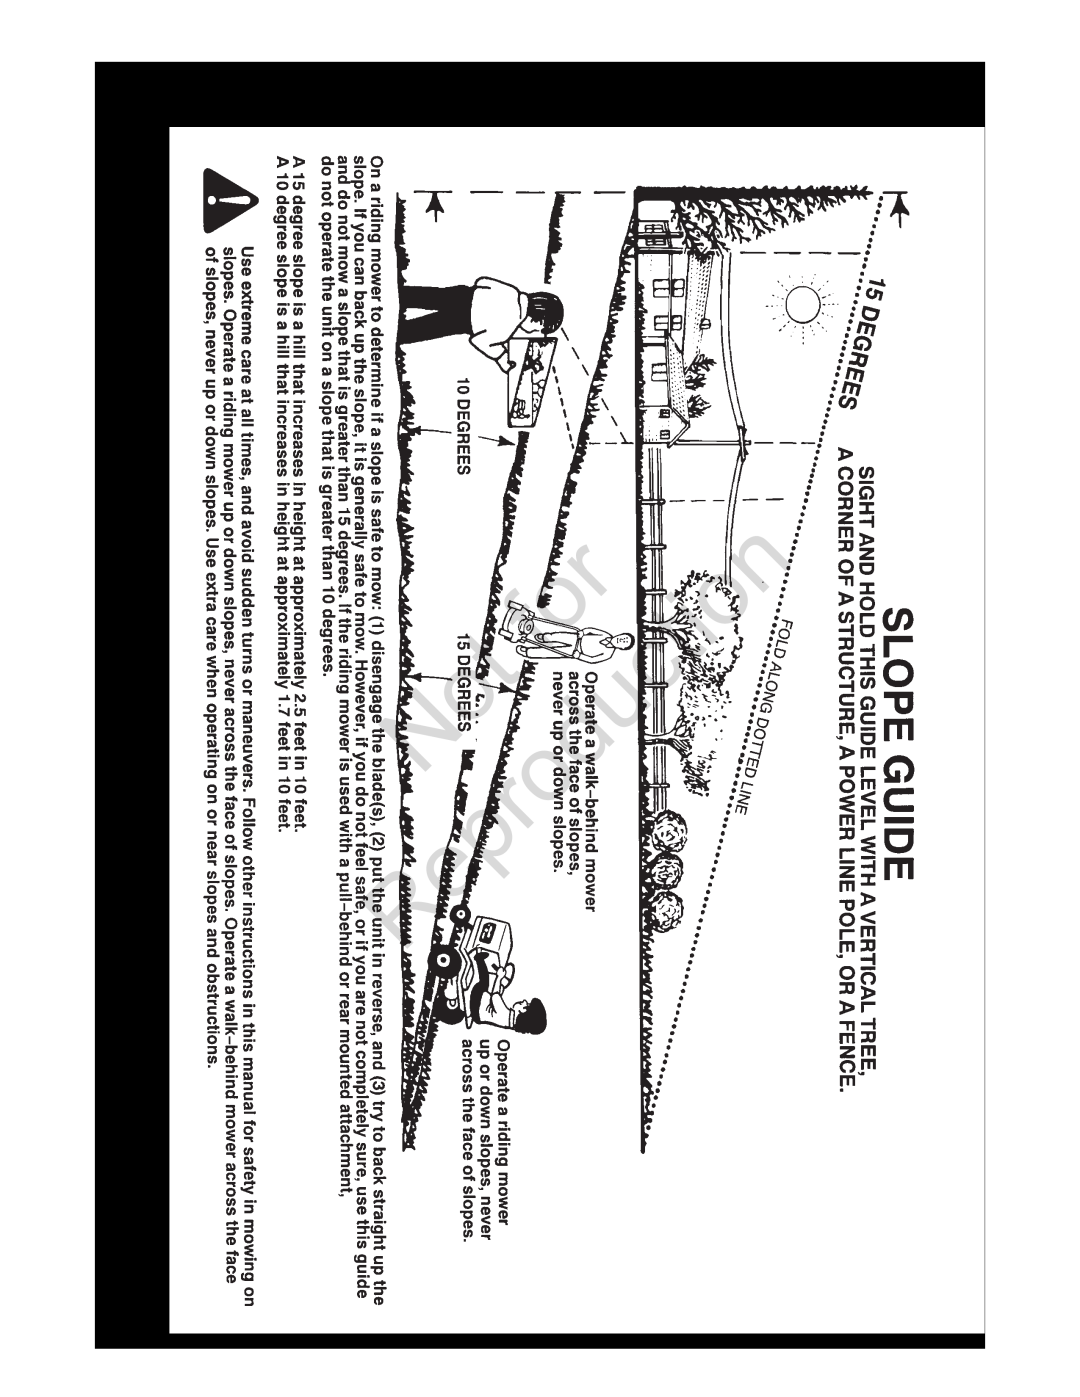 Snapper 7800787, 7800785, 7800784, 7800786 manual Slope Guide, Reproduction 